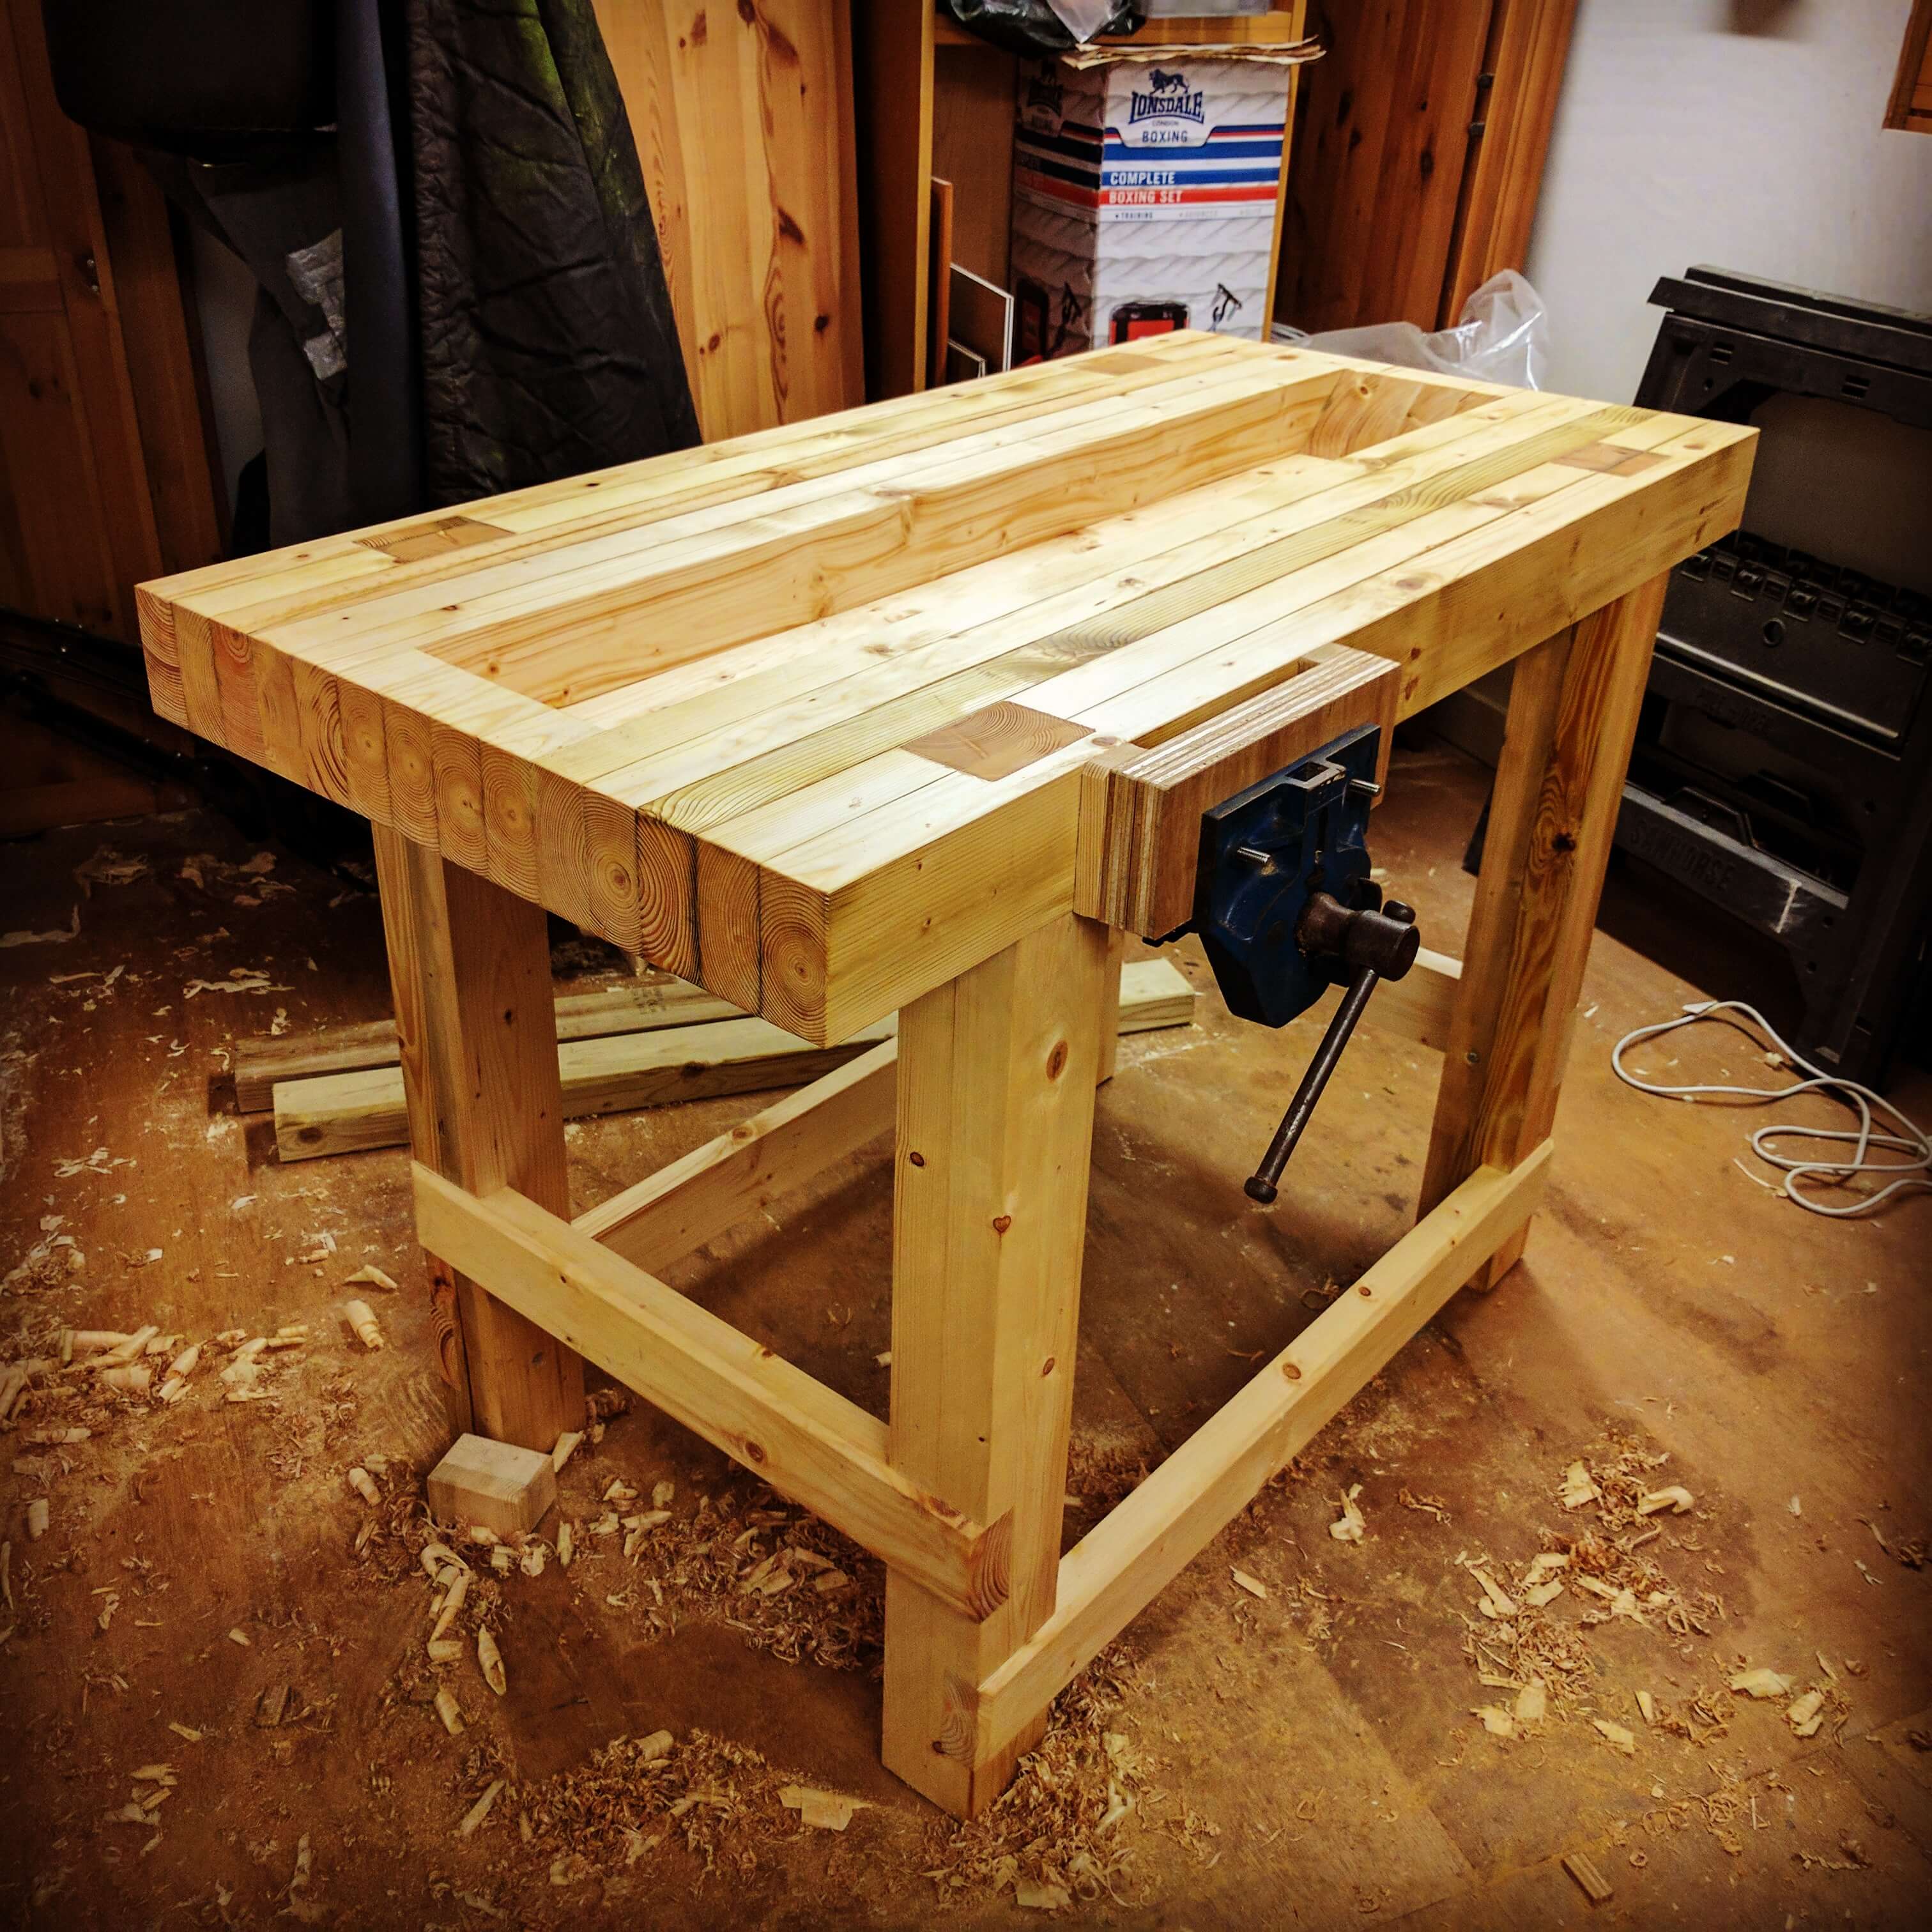 Jay bates woodworking bench plans Main Image